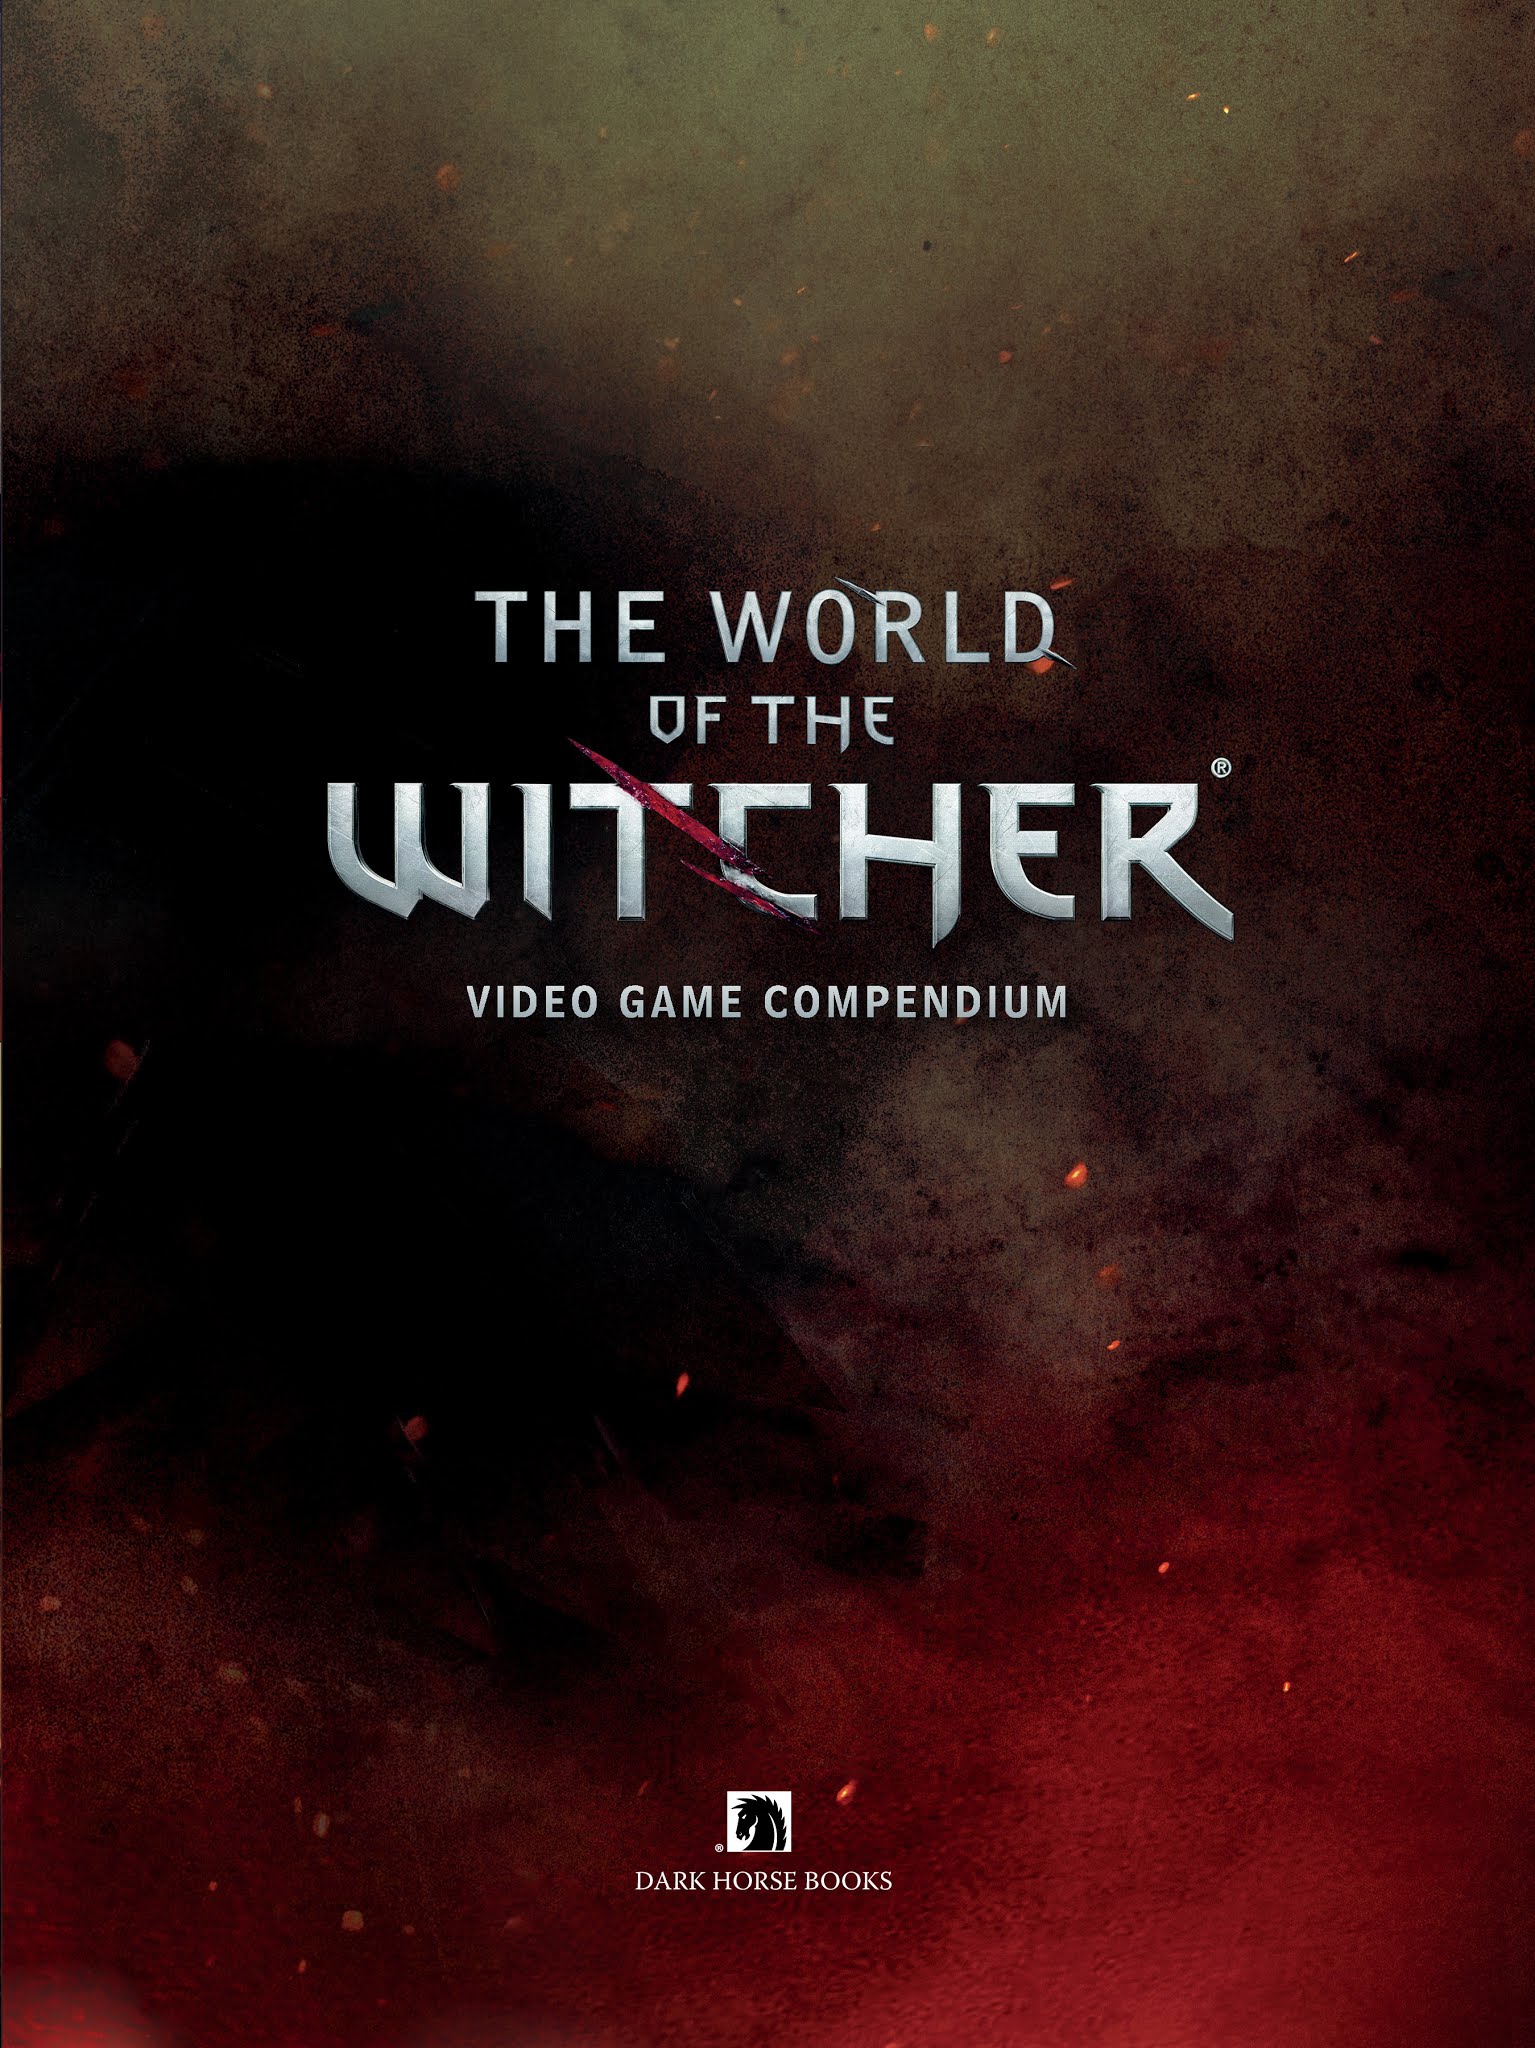 Read online The World of the Witcher comic -  Issue # TPB (Part 1) - 4